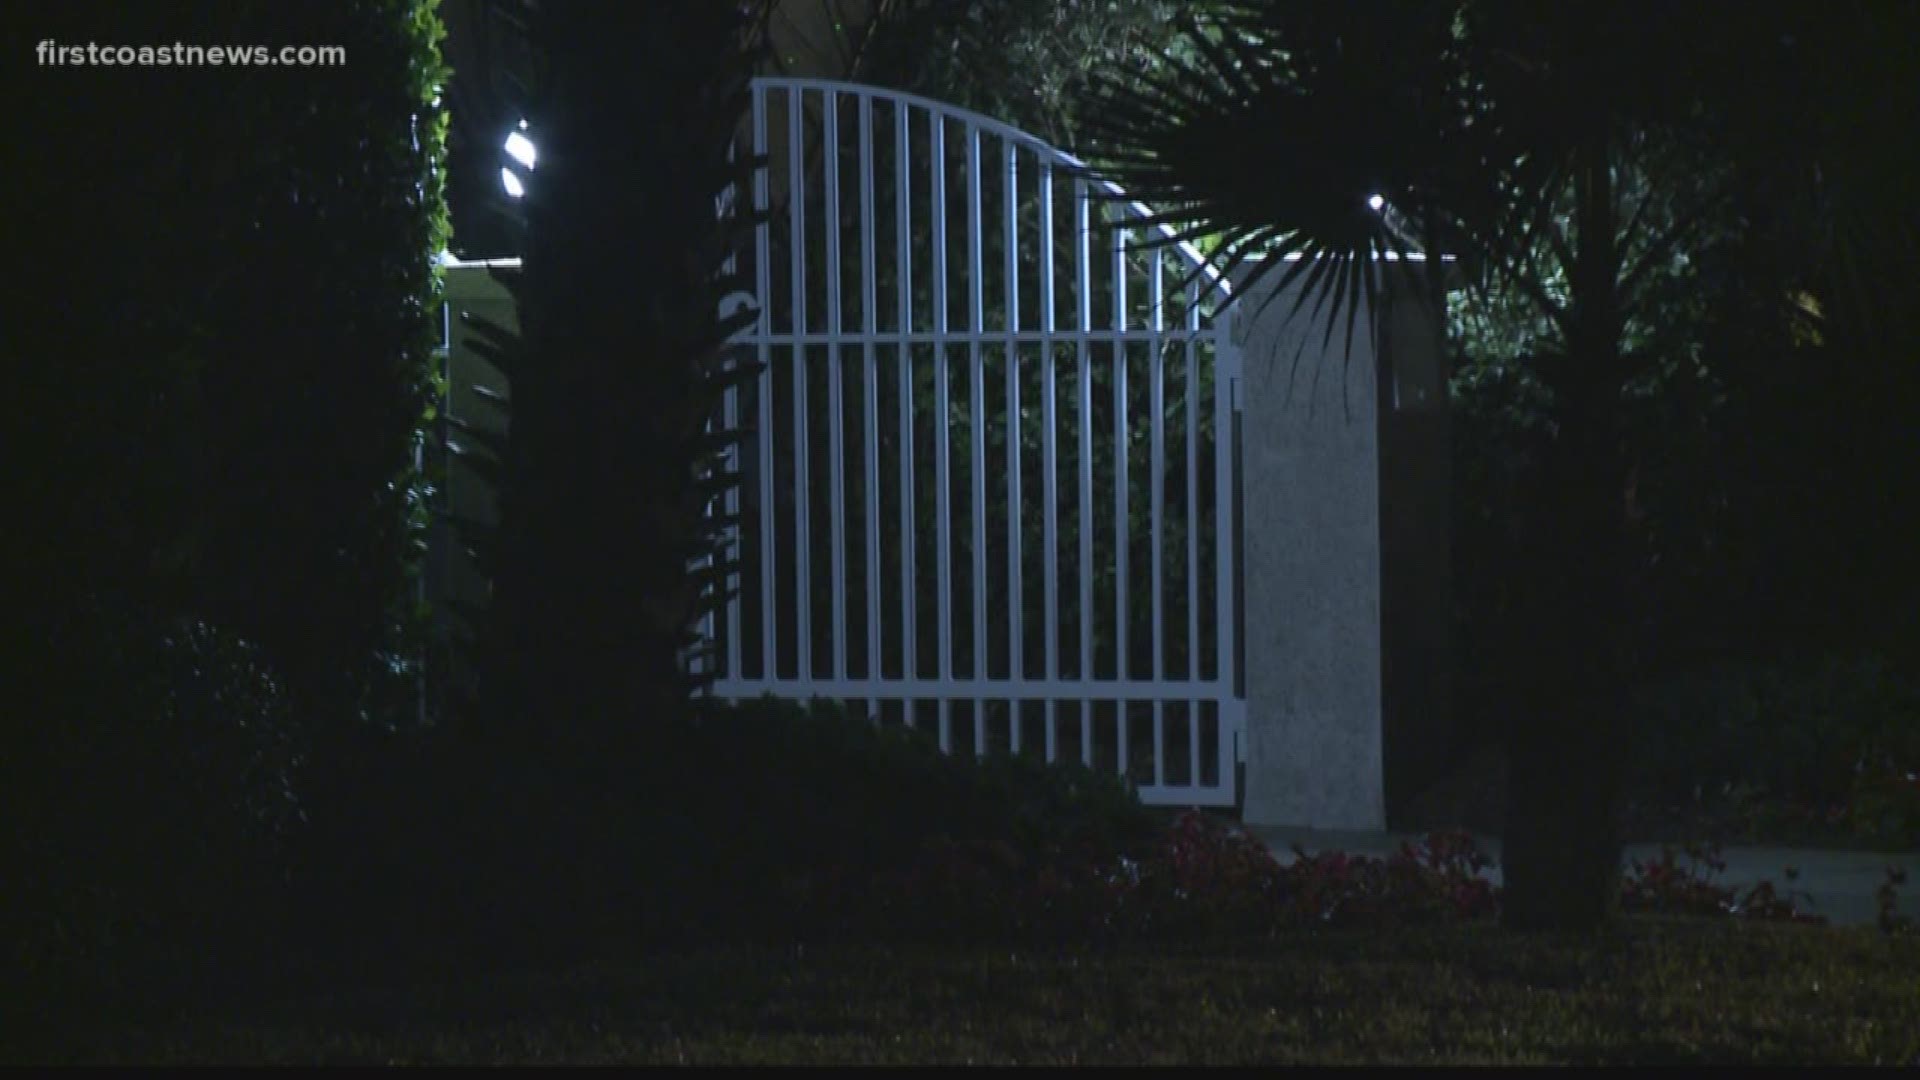 The Fernandina Beach Police Department is investigating a home invasion robbery that occurred early Saturday morning.